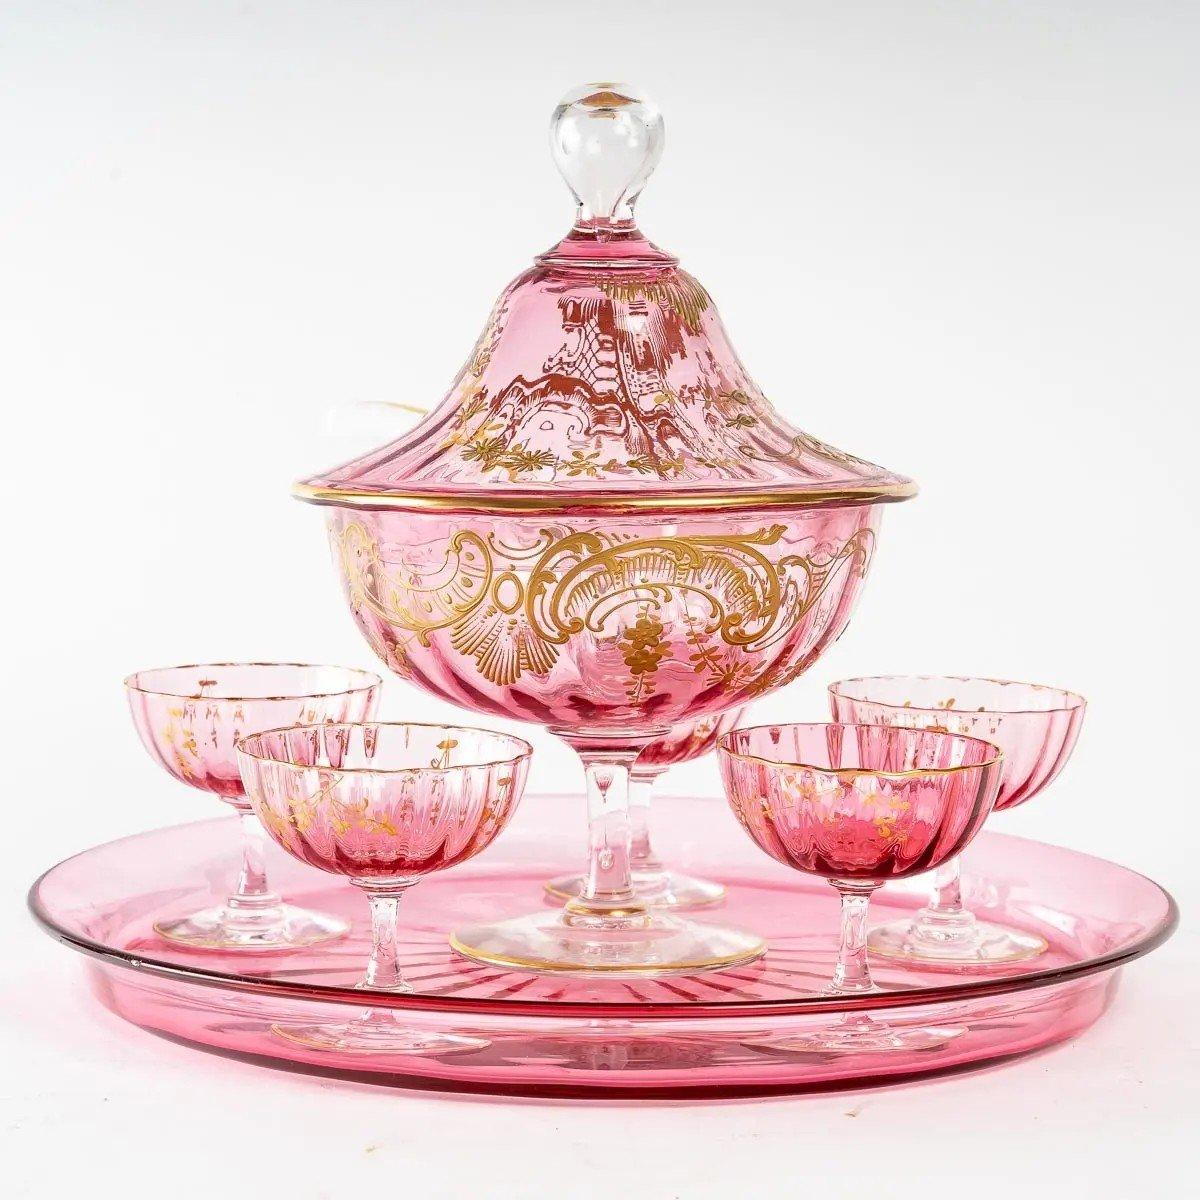 Pink crystal dinner service, 19th century
Splendid pink crystal dinner service, containing 5 glasses, a cup with its spoon and their tray. Napoleon III period, 19th century. 
Perfect condition. 
Tray - D: 29cm,
Glasses - H: 7 cm, W: 7 cm 
Cup -